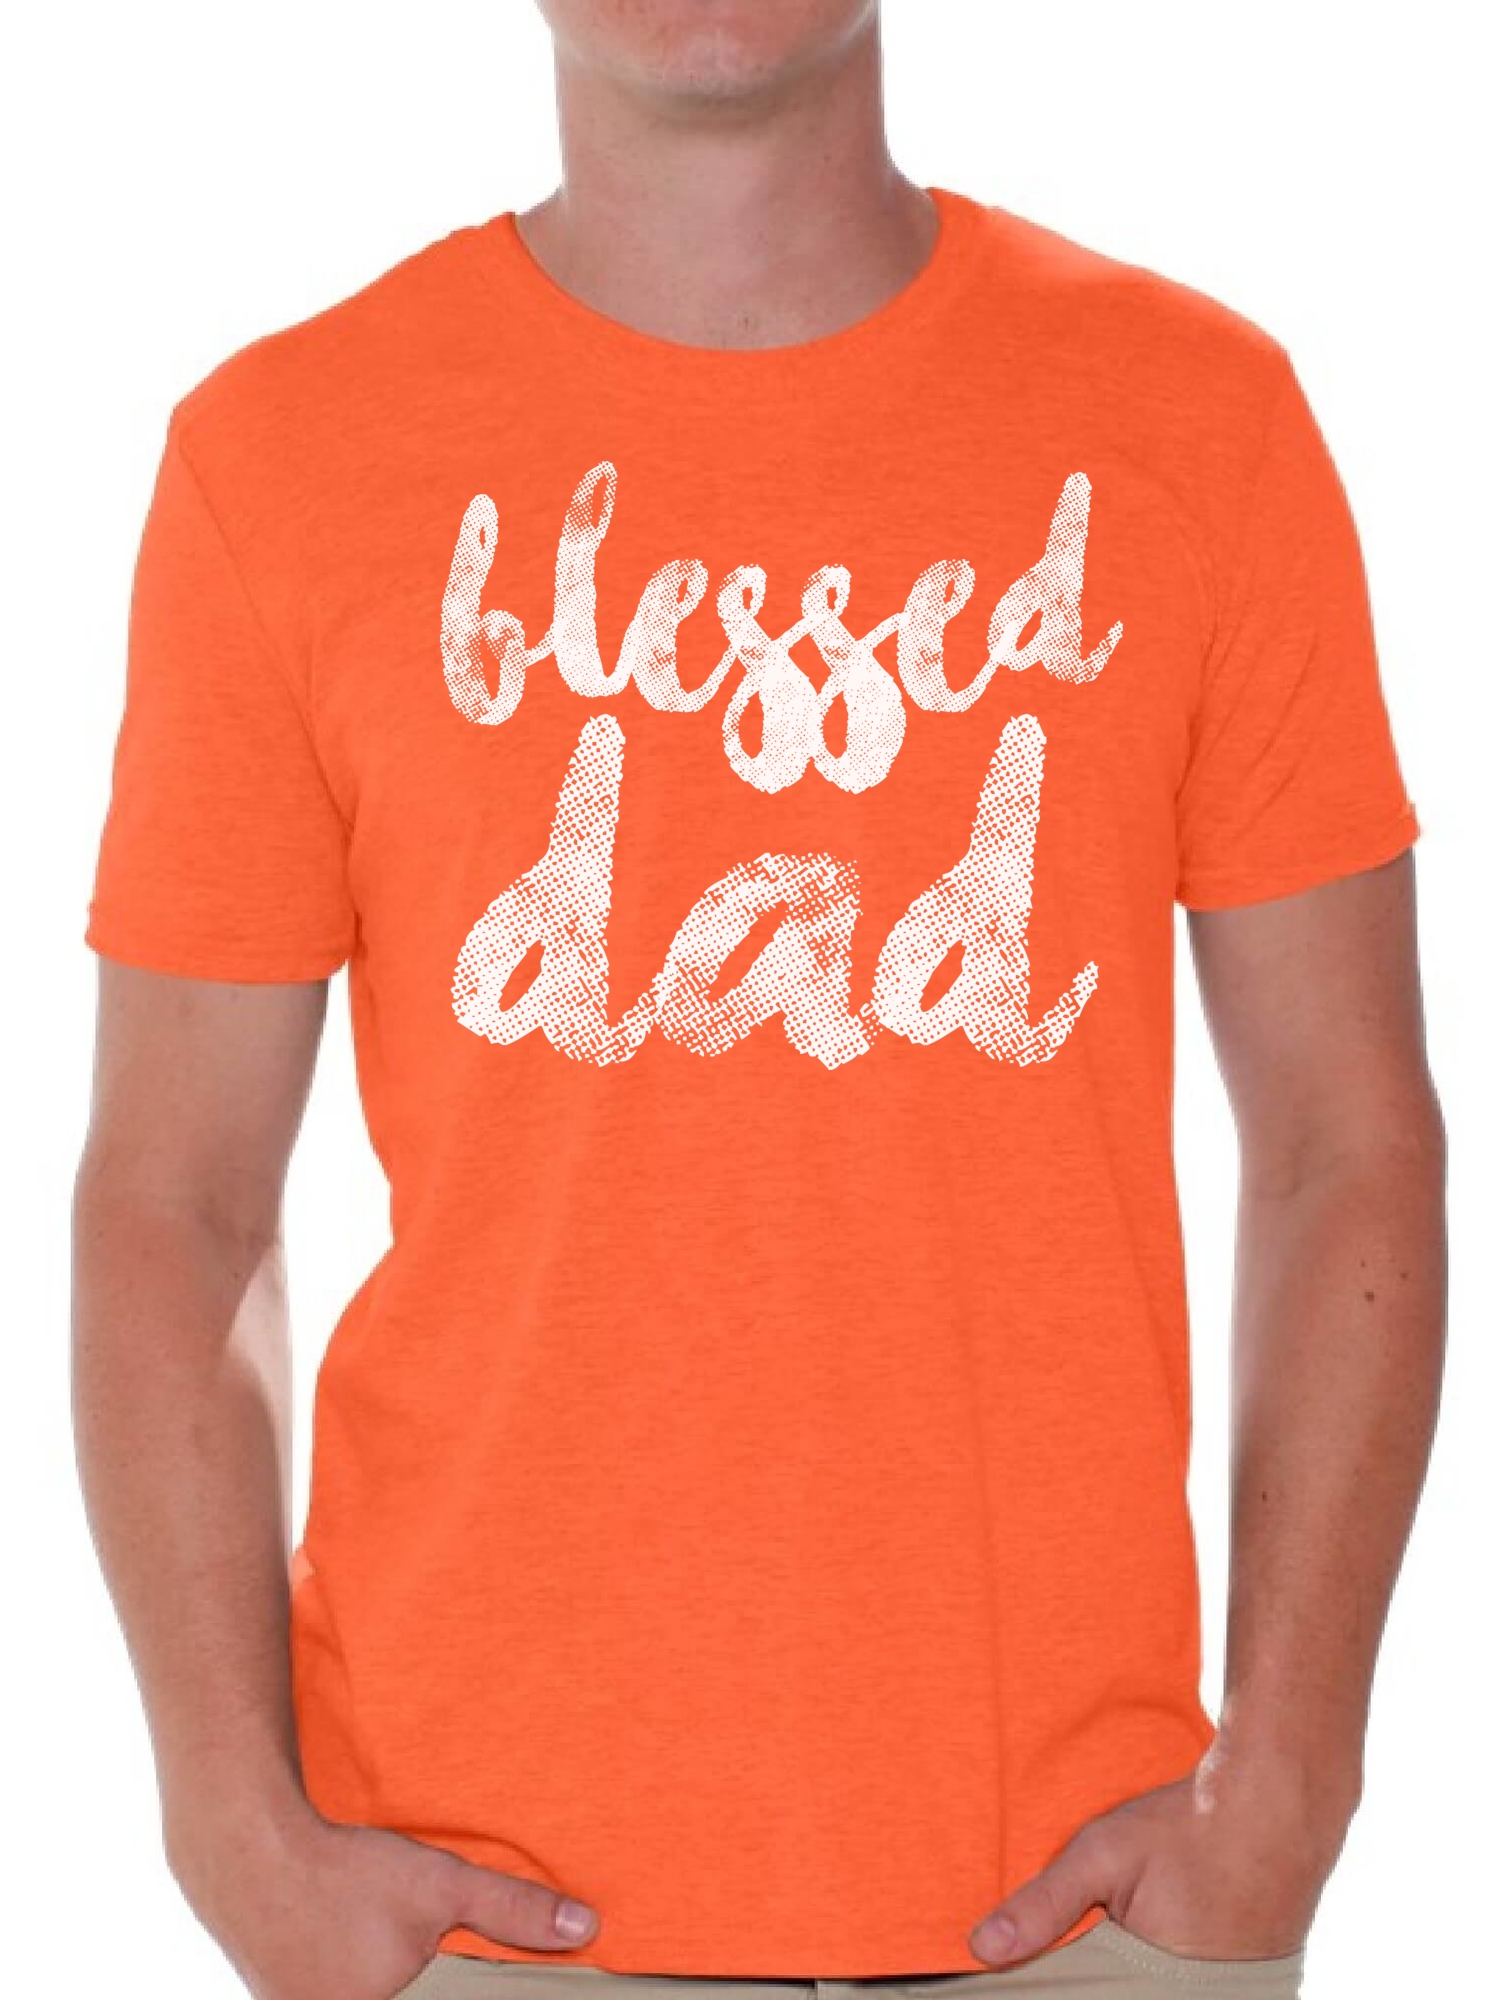 Awkward Styles Blessed Daddy Shirt Cute Gifts for the Best Dad Blessed Dad Best Father`s Day Gift Best Father T Shirt Father`s Day Men Shirt Tshirt for Dad Father`s Day Gifts Ideas - image 1 of 4